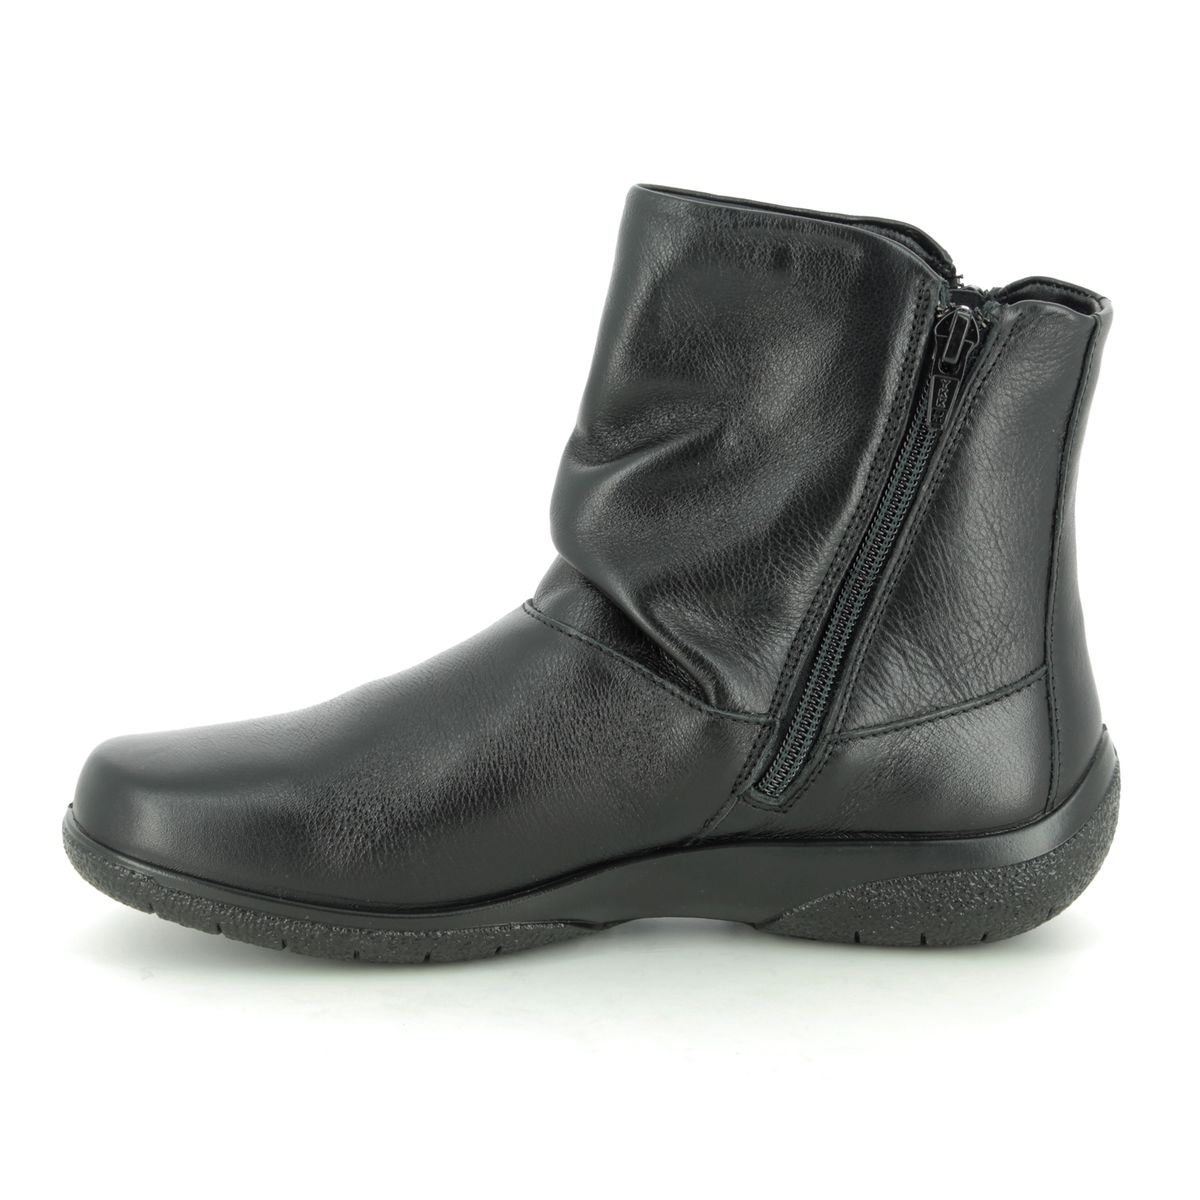 Hotter Whisper 95 E 9503-30 Black leather Ankle Boots